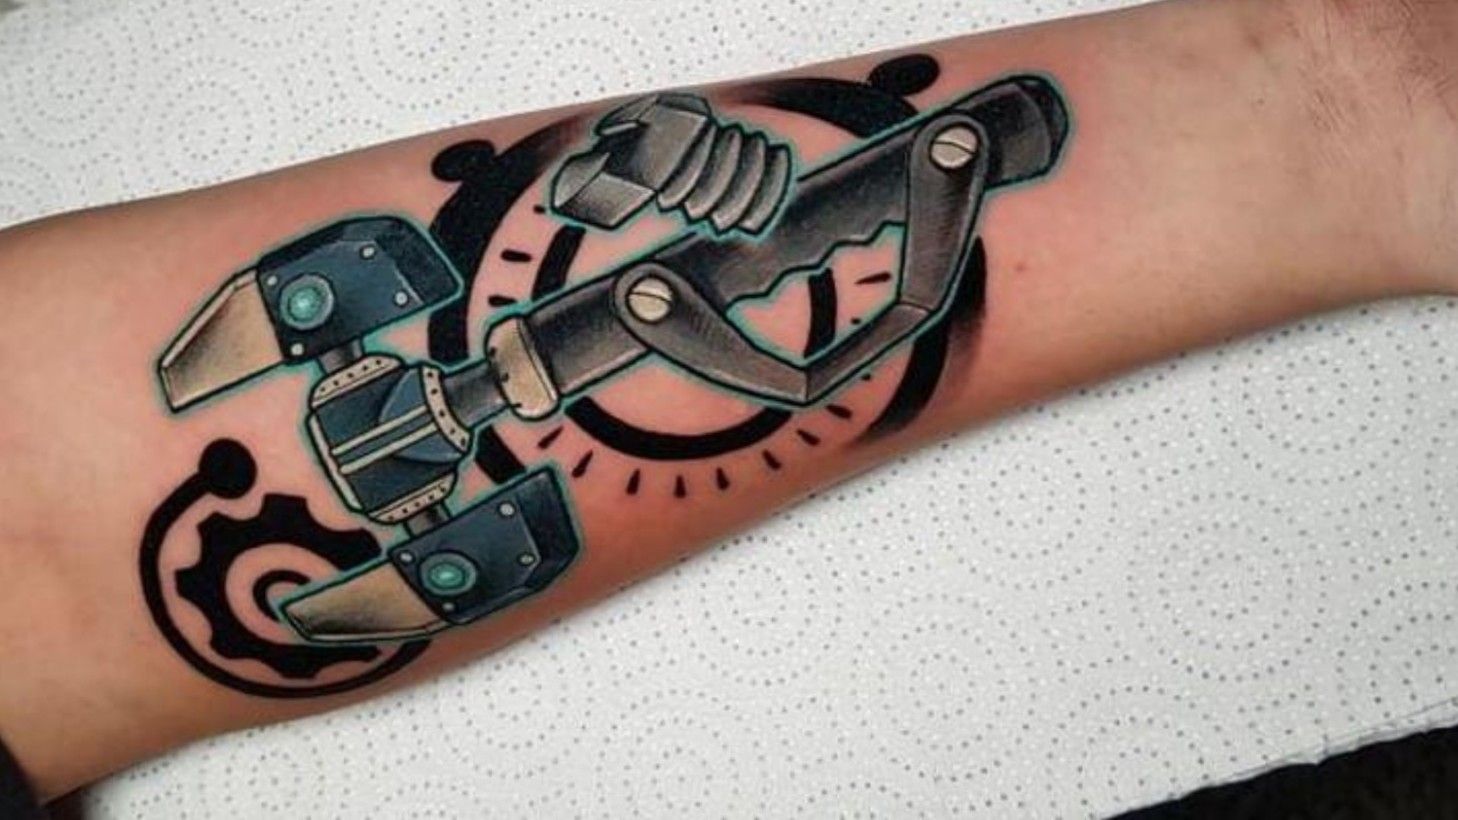 Ratchet and Clank tattoo by Mefisto Tattoo  Post 15589